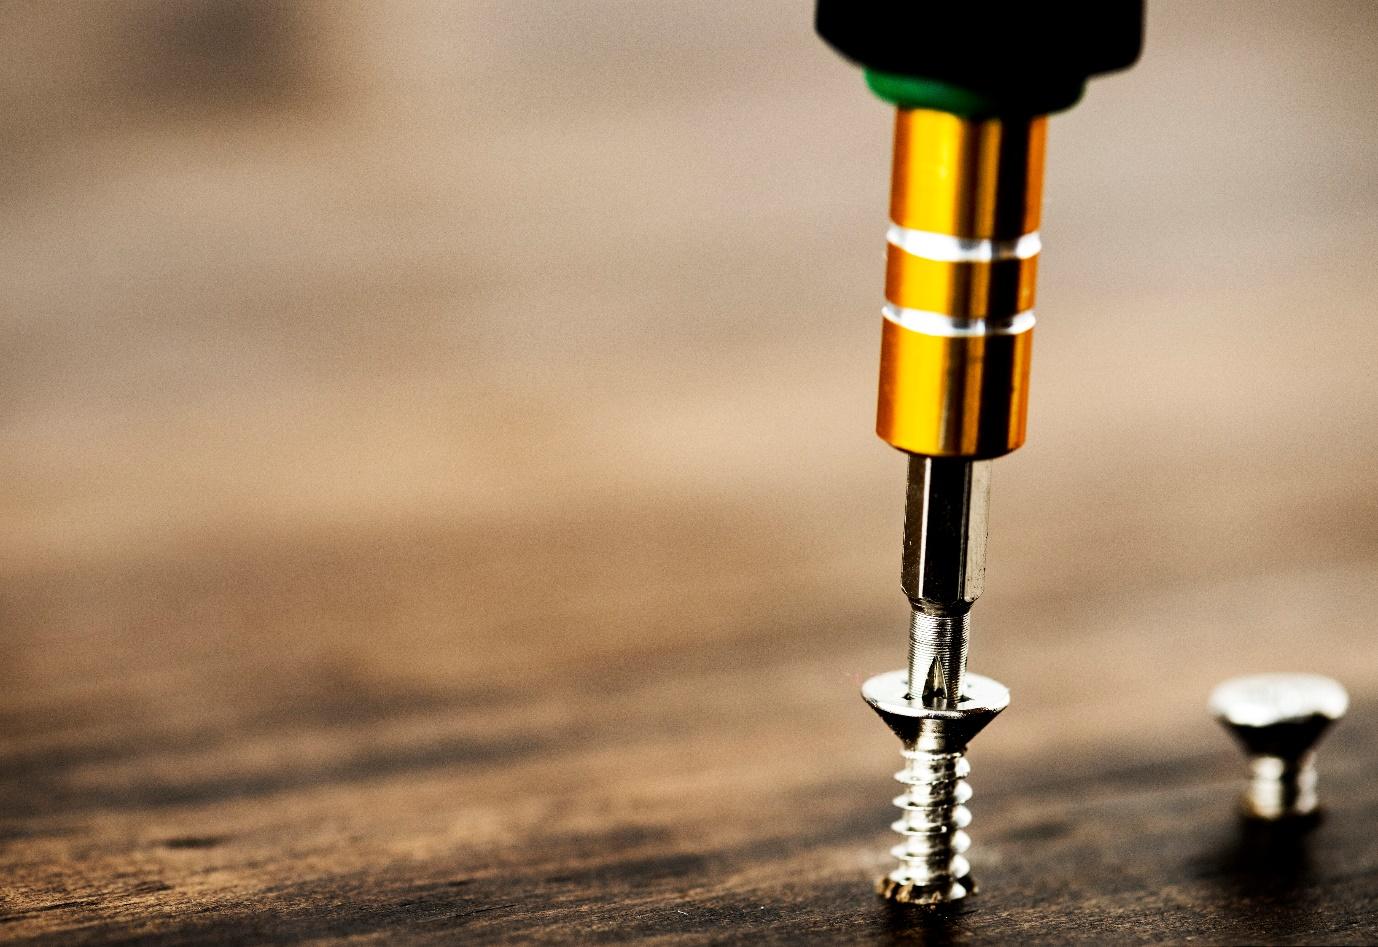 A close-up of a screwdriver

Description automatically generated